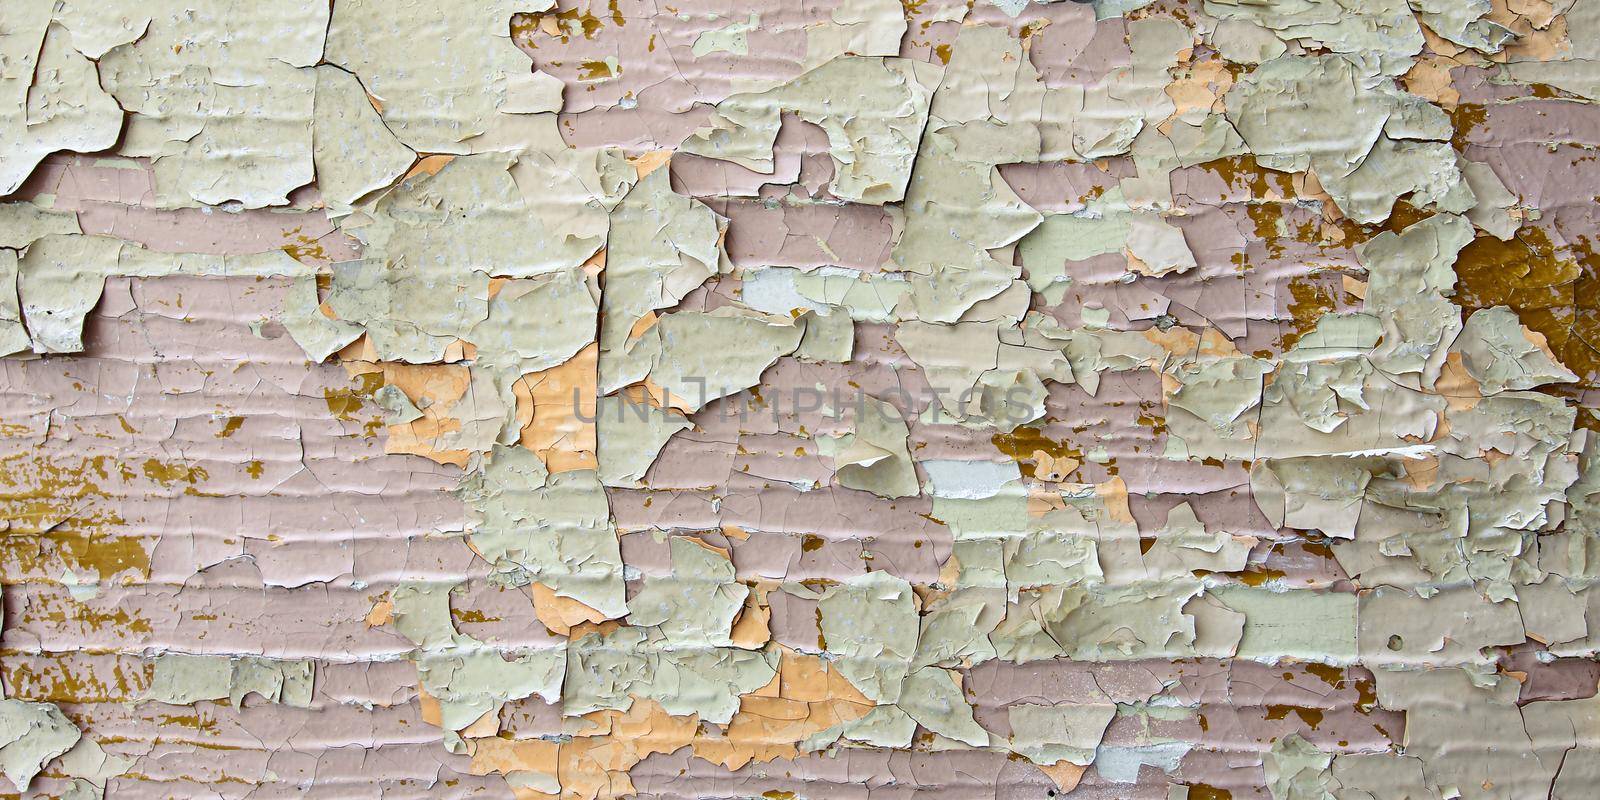 Cracks in the old plaster - grunge texture HD resolution